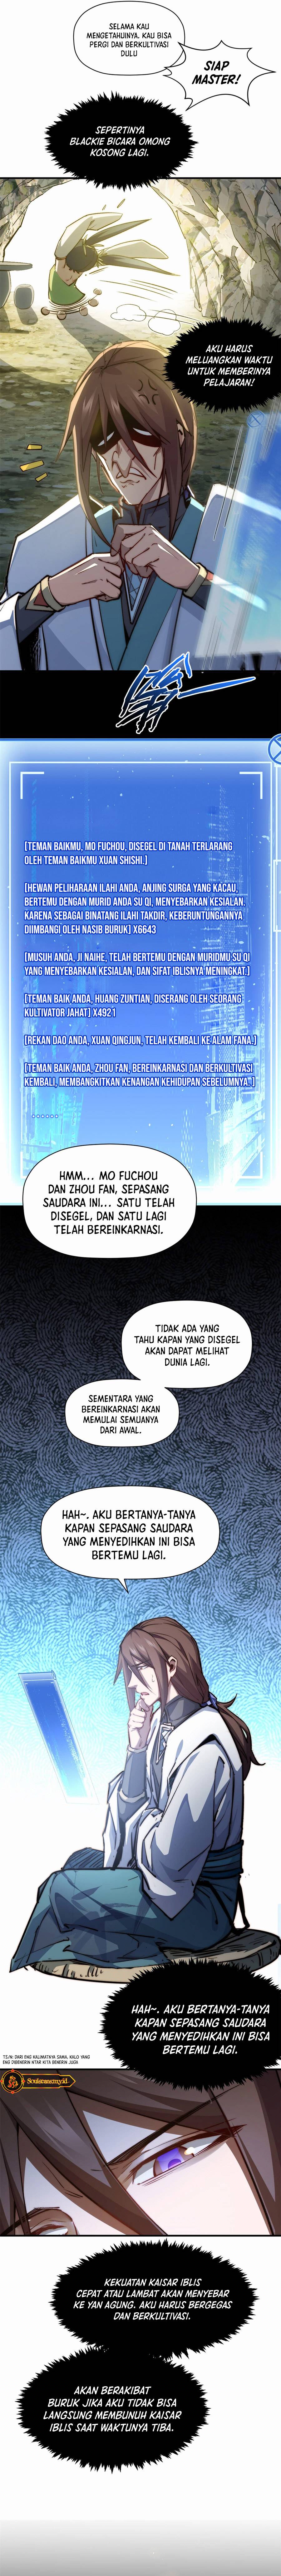 Dilarang COPAS - situs resmi www.mangacanblog.com - Komik top tier providence secretly cultivate for a thousand years 131 - chapter 131 132 Indonesia top tier providence secretly cultivate for a thousand years 131 - chapter 131 Terbaru 3|Baca Manga Komik Indonesia|Mangacan